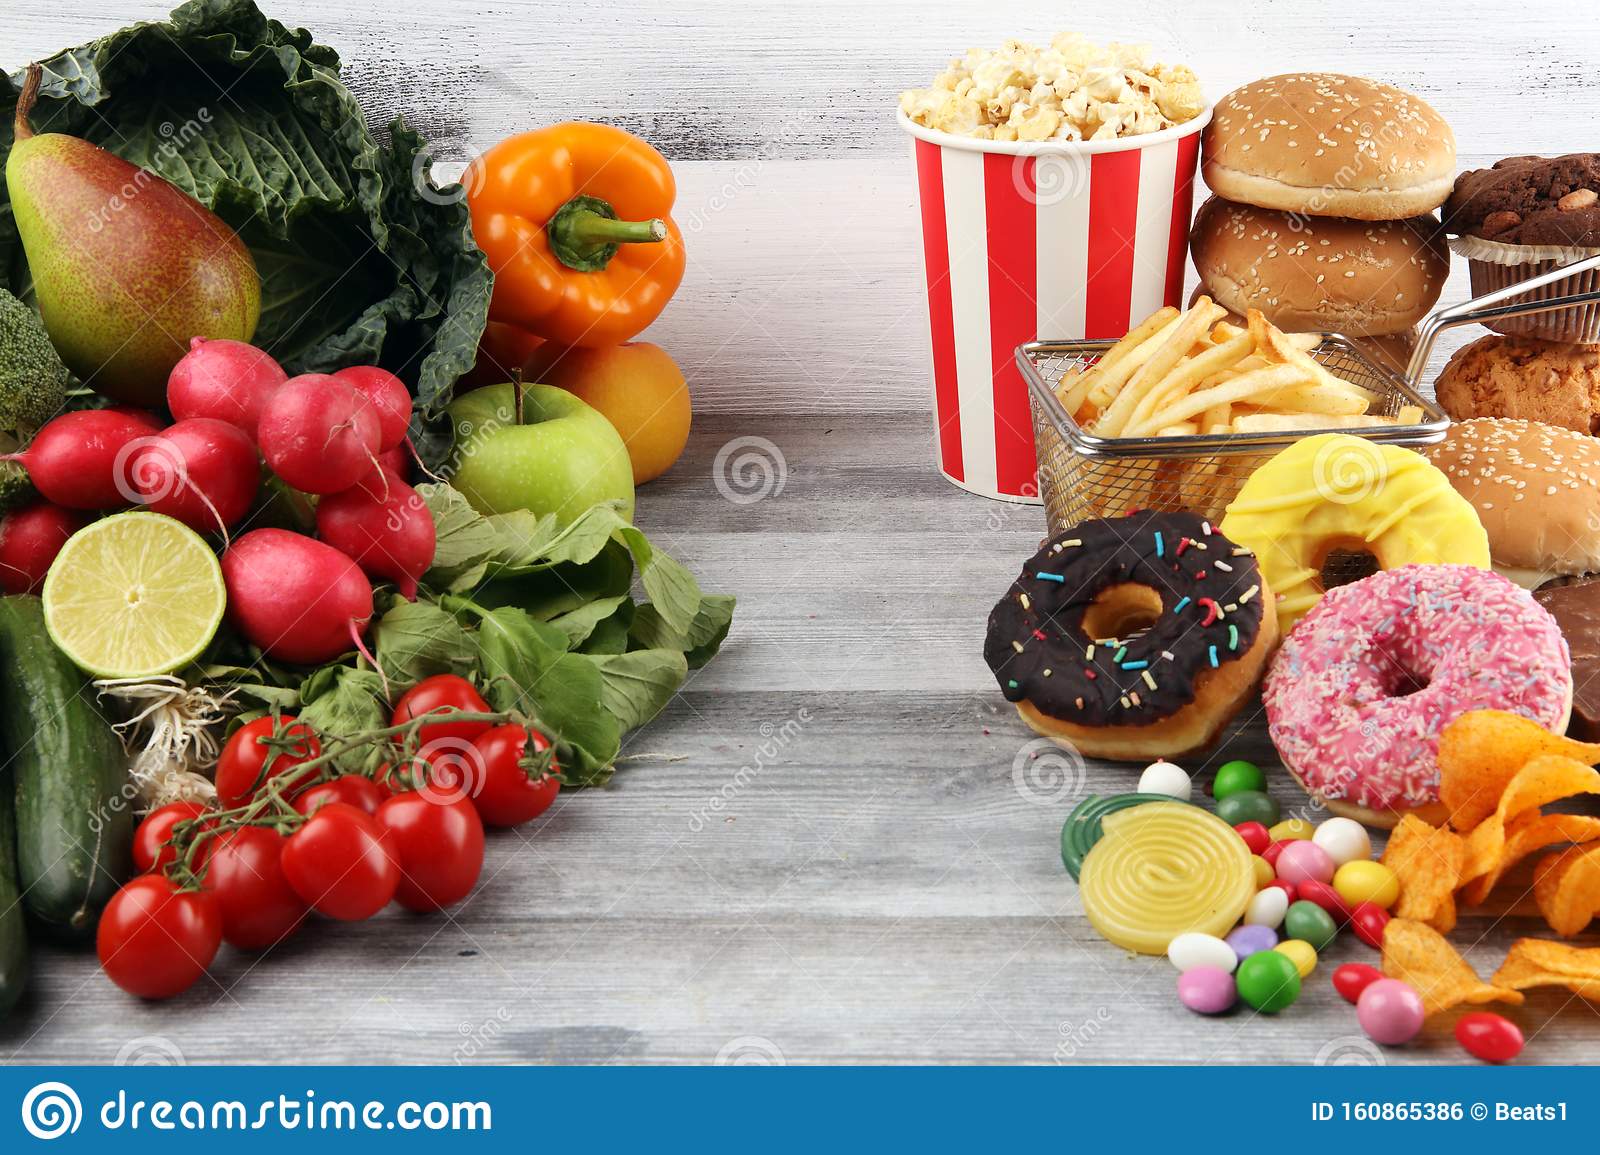 Healthy Or Unhealthy Food. Concept Photo Of Healthy And Unhealthy Food ...